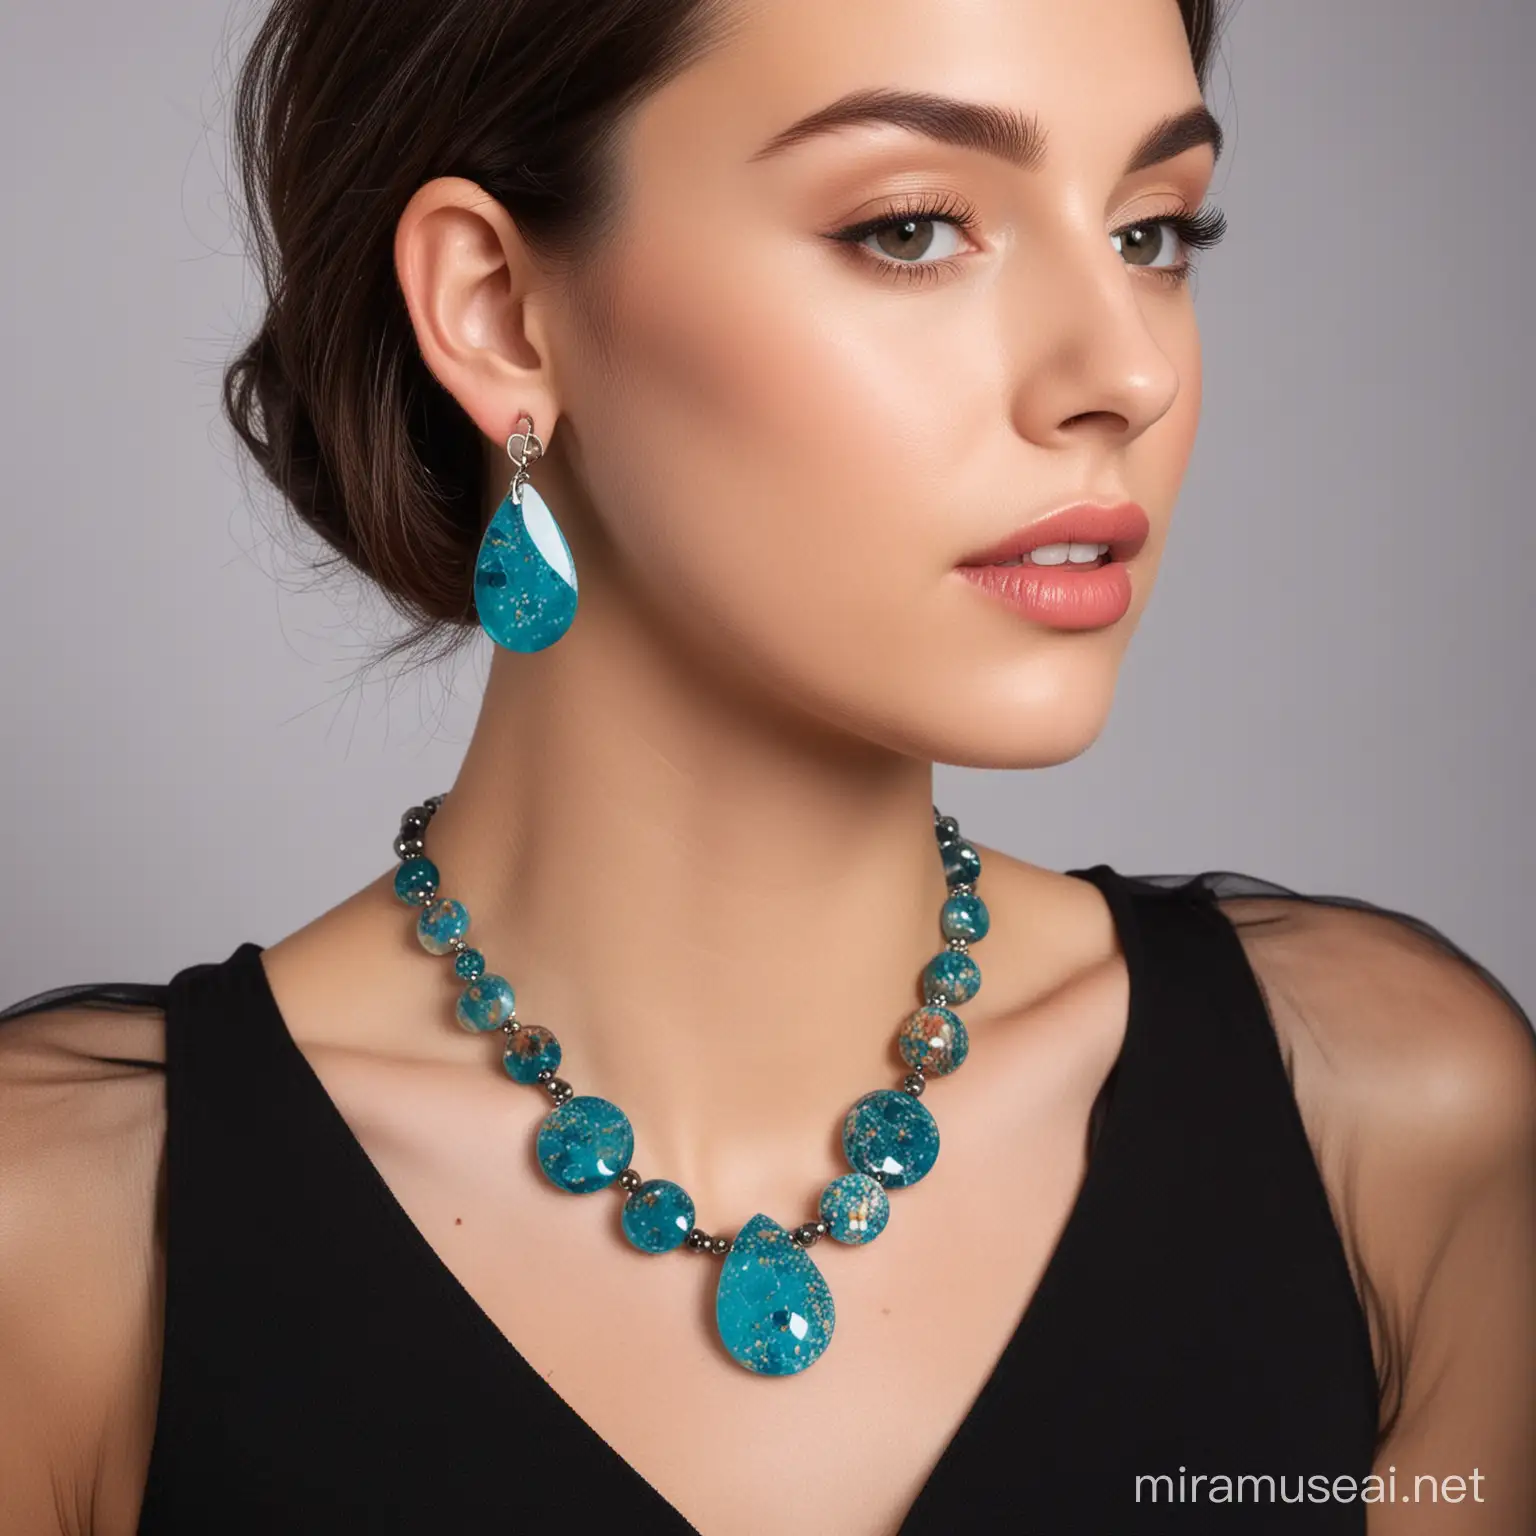 lady wearing resin necklace and earrings